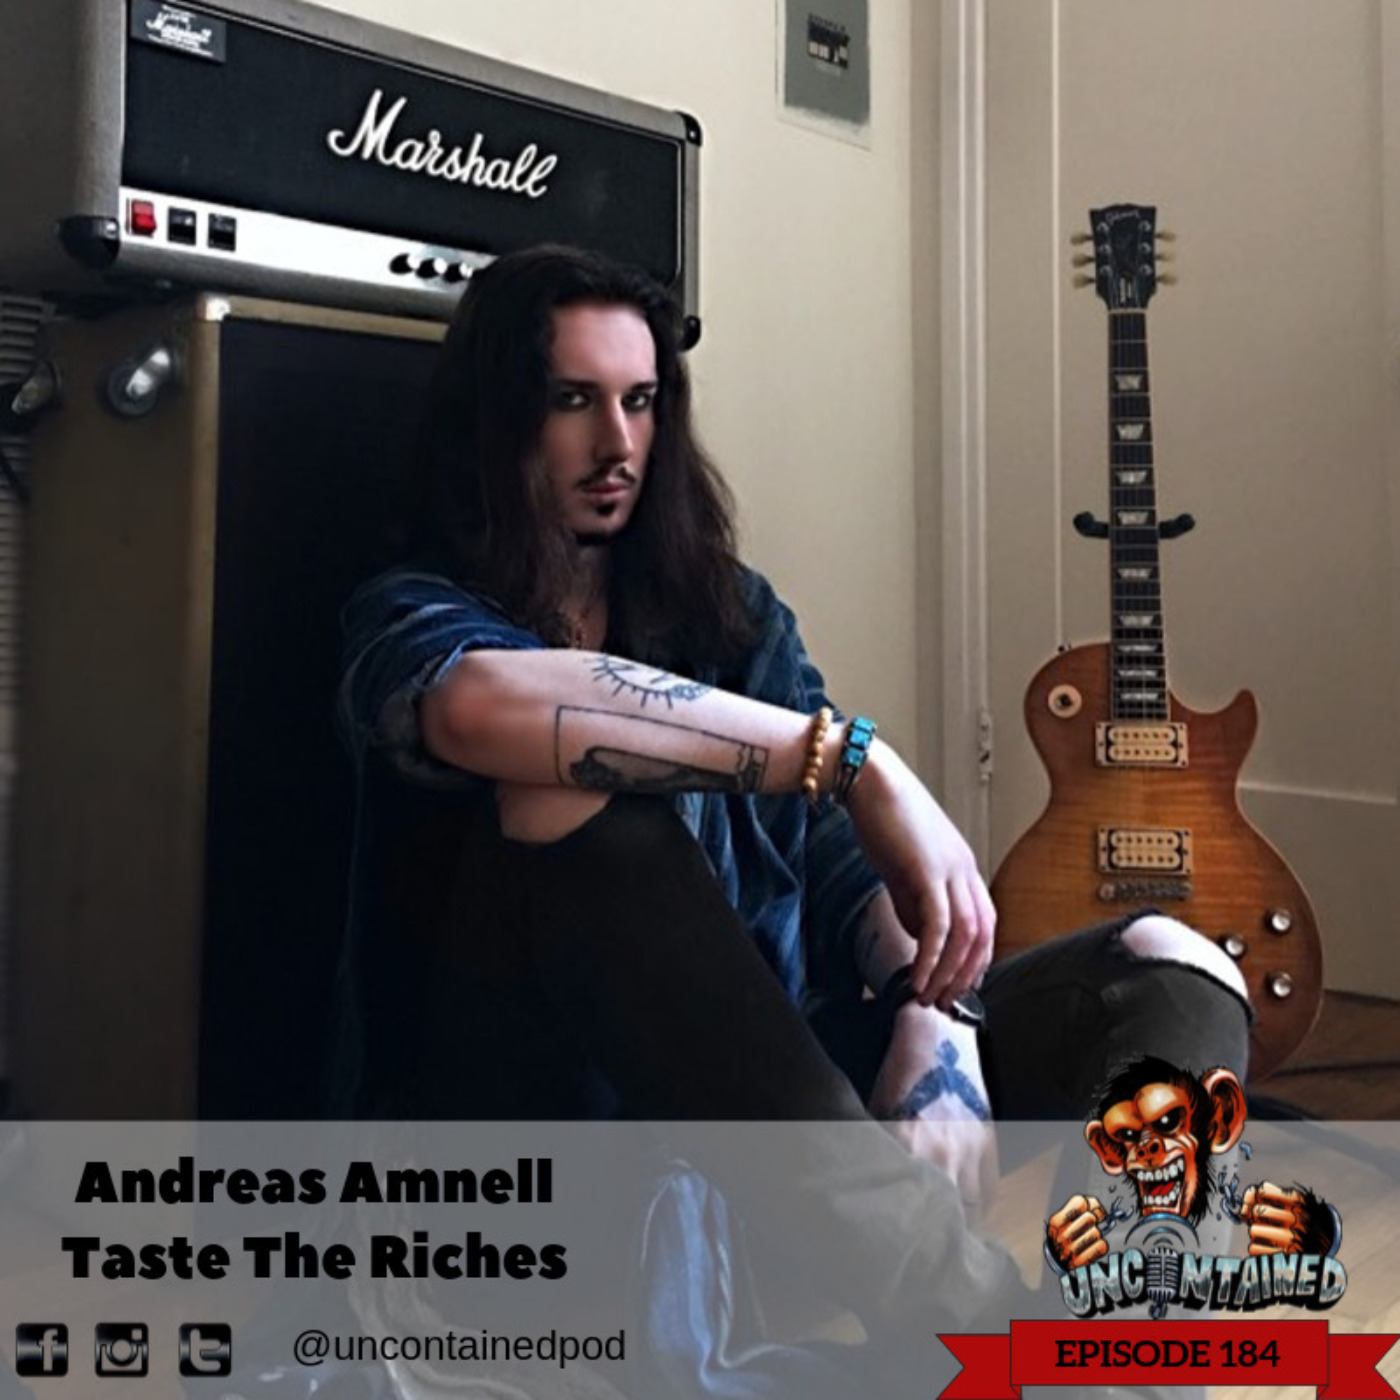 Episode 184: Andreas Amnell - Taste The Riches